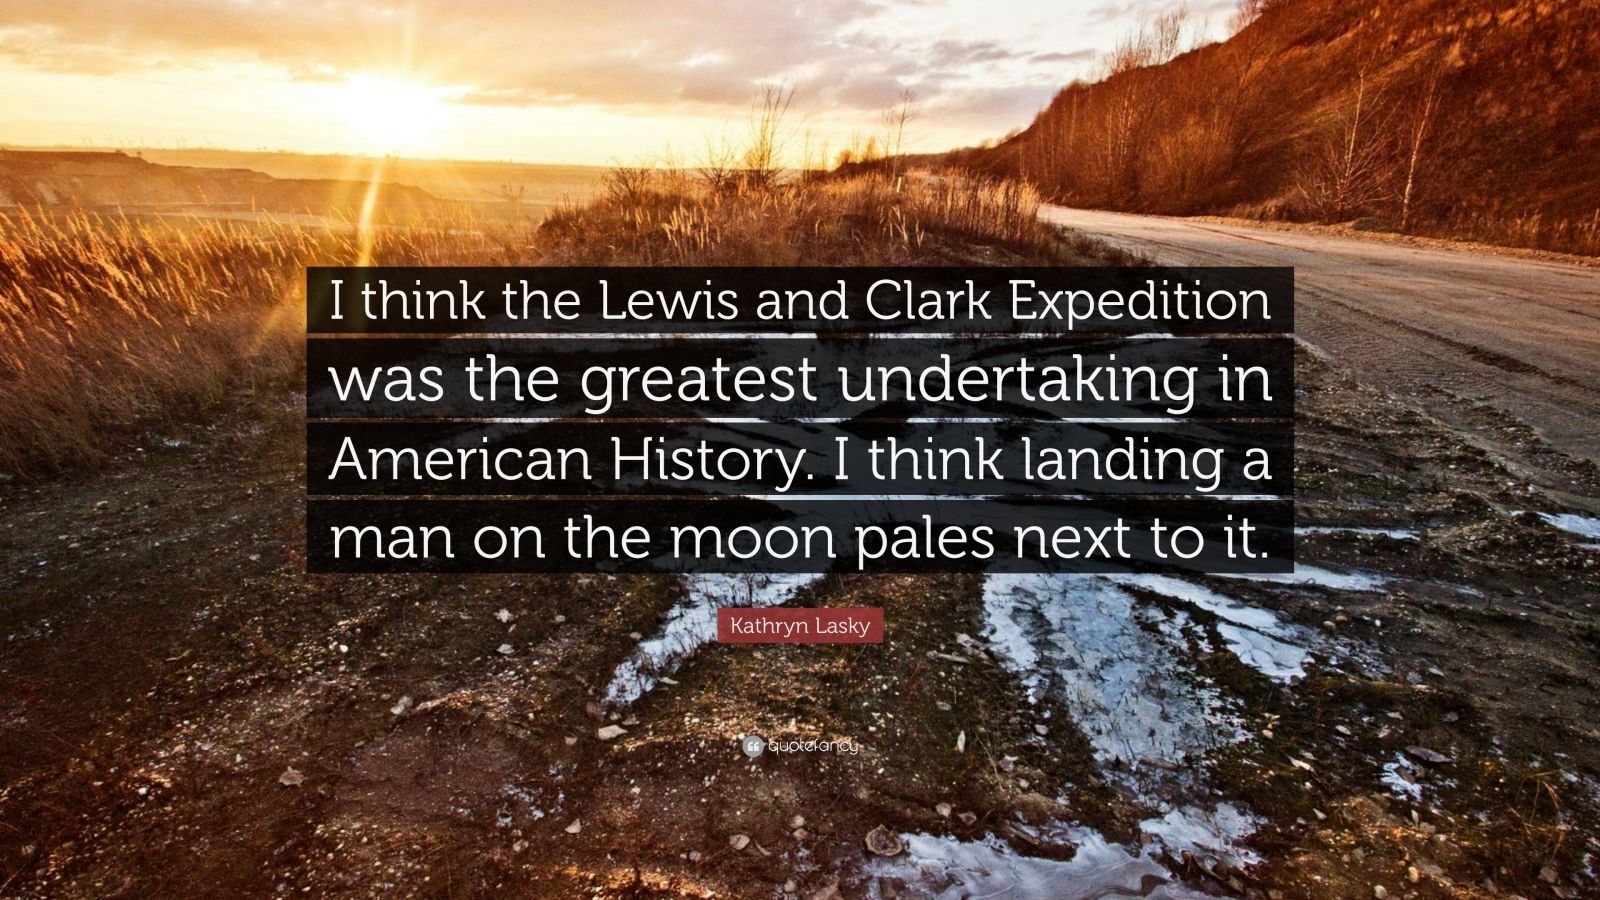 Kathryn Lasky Quote: “I think the Lewis and Clark Expedition was the greatest undertaking in American History. I think landing a man on the mo.”